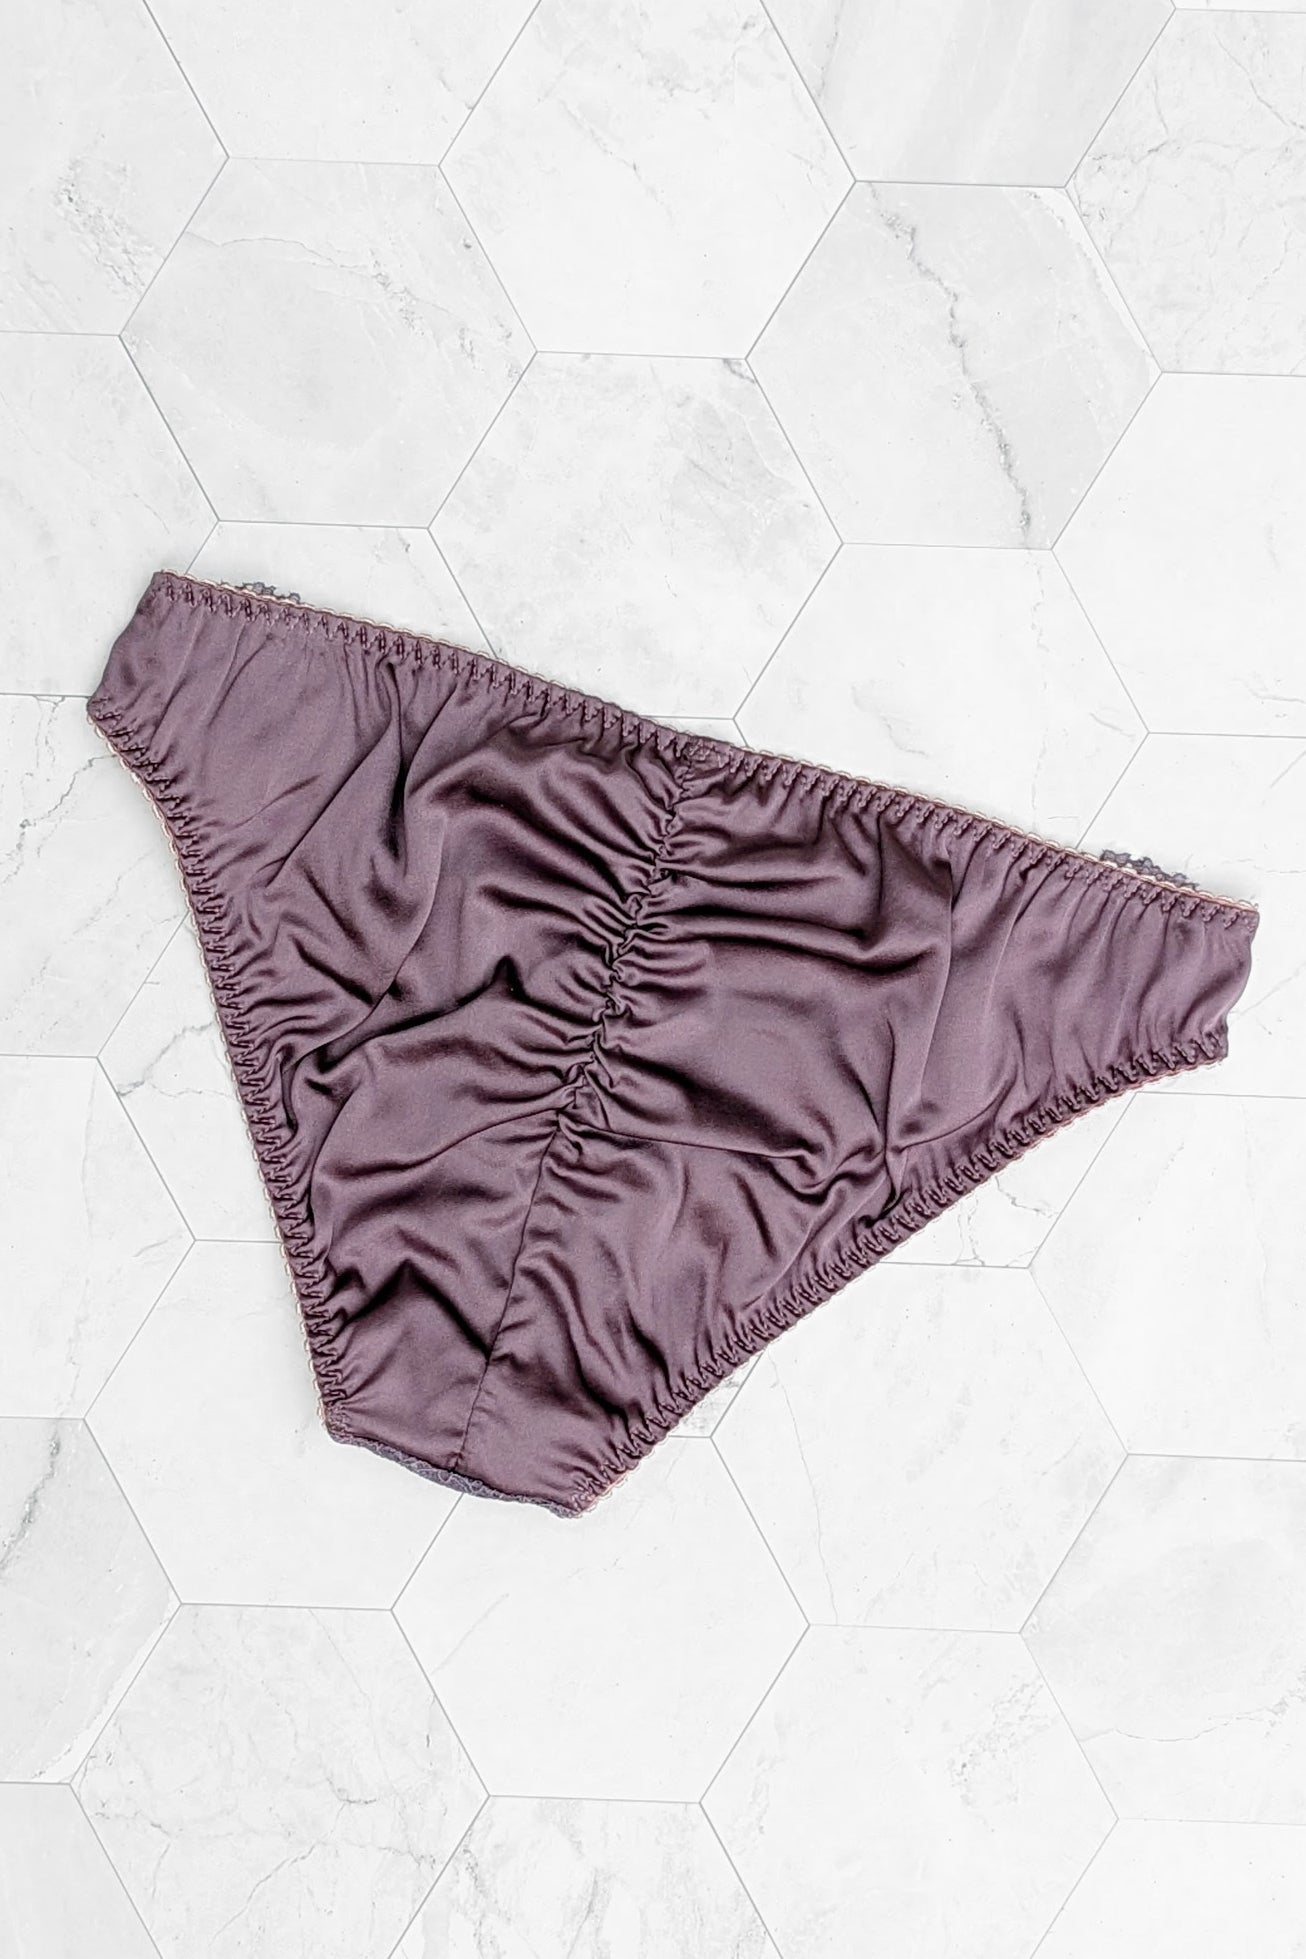 Mauve purple panties handcrafted in silk satin with sheer lace trims